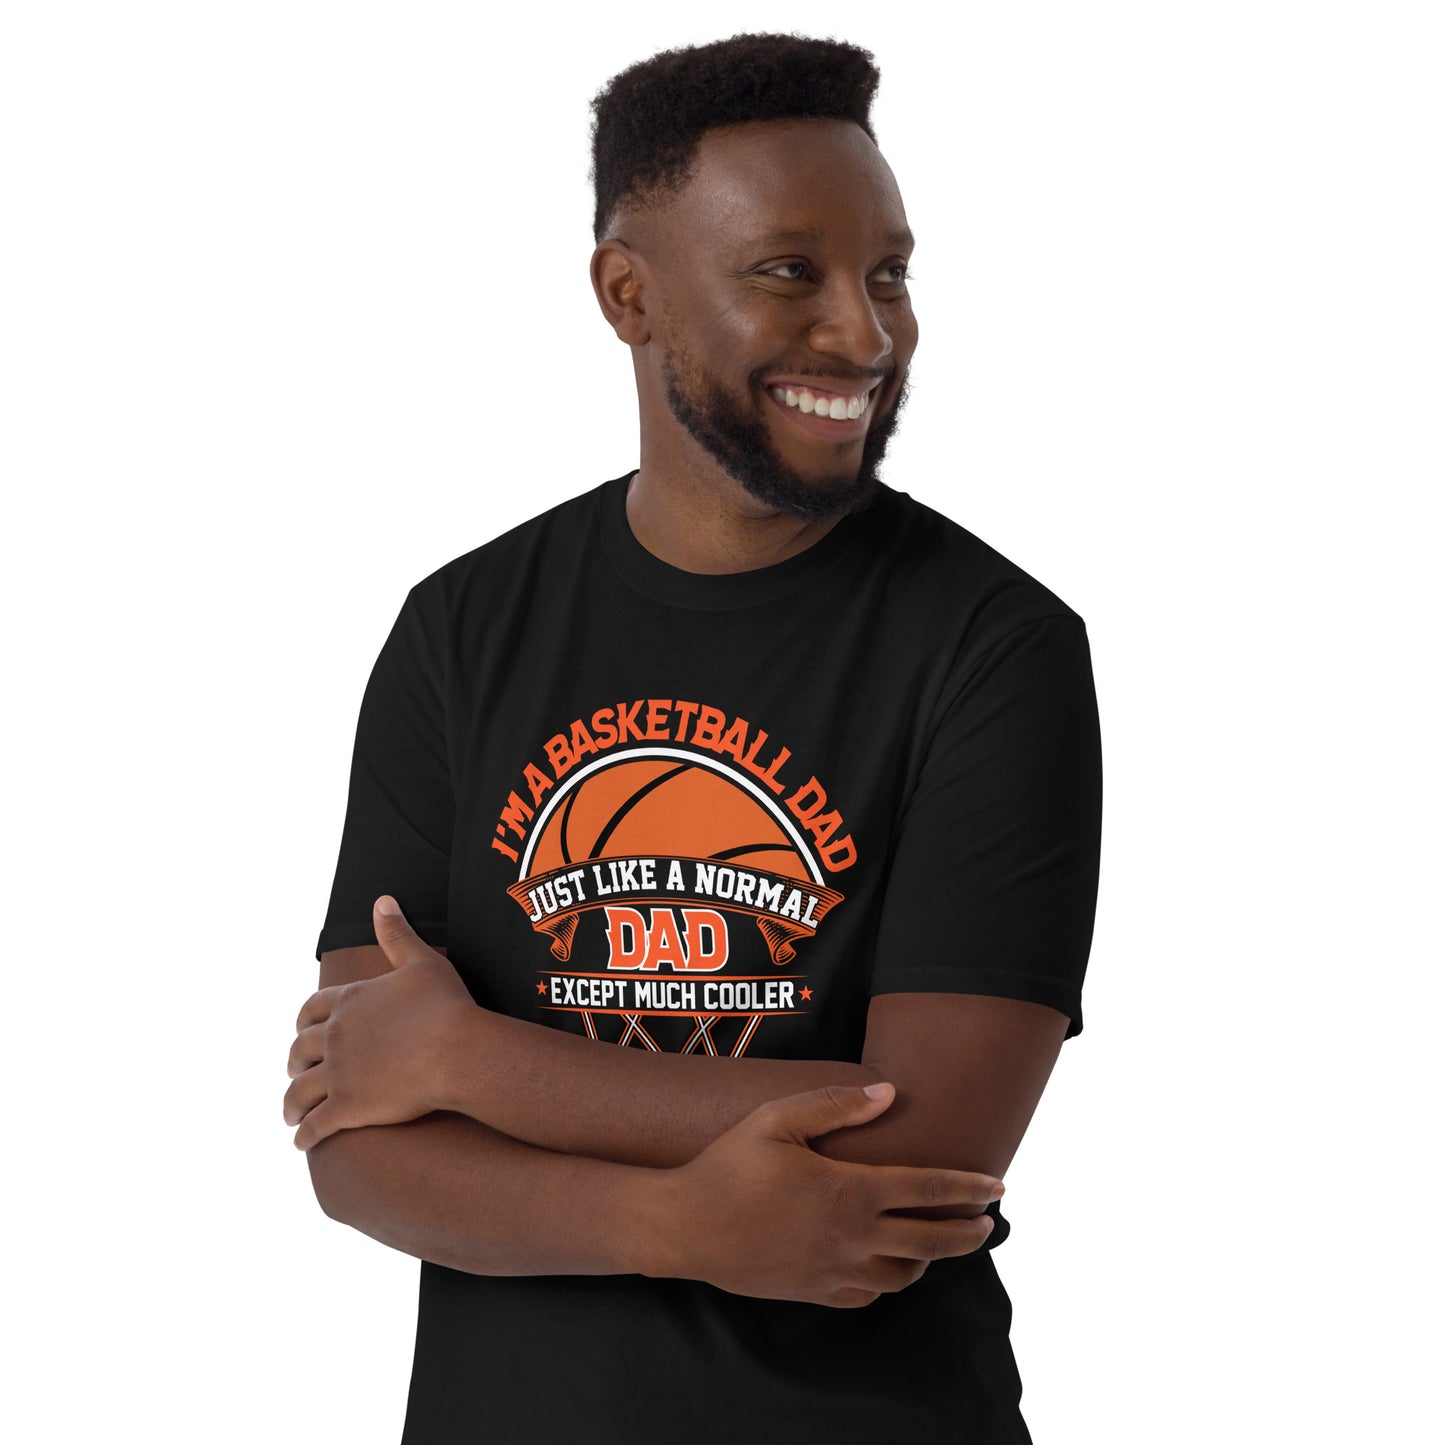 "I'm a Basketball Dad" Personalized T-Shirt.